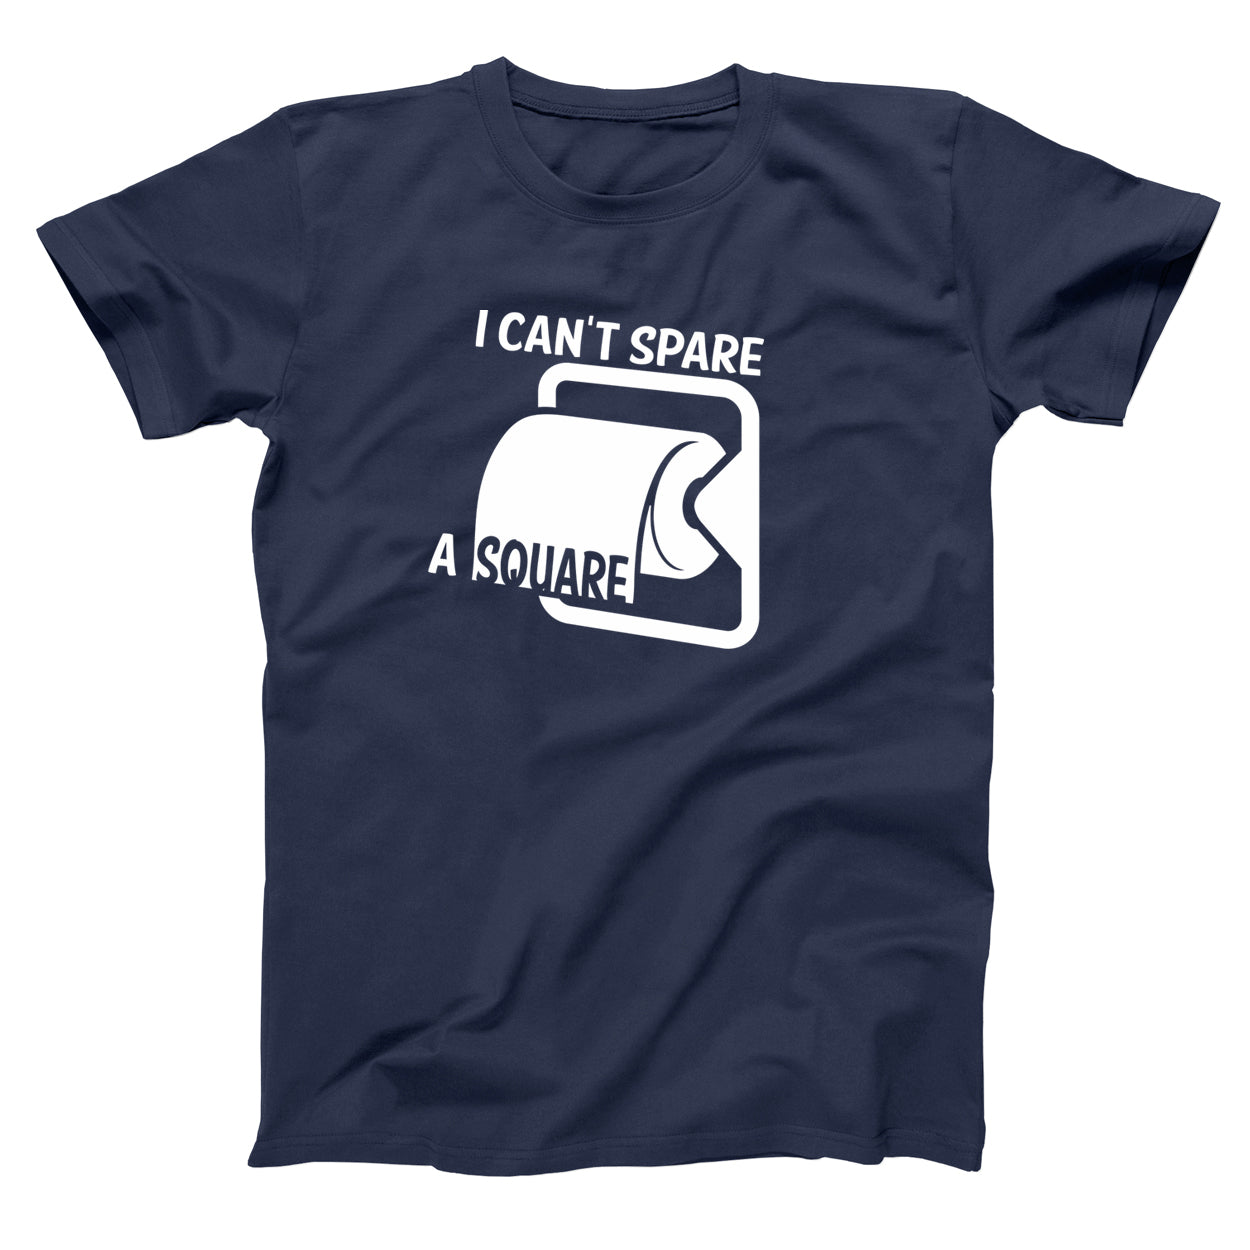 I Can't Spare a Square Tshirt - Donkey Tees